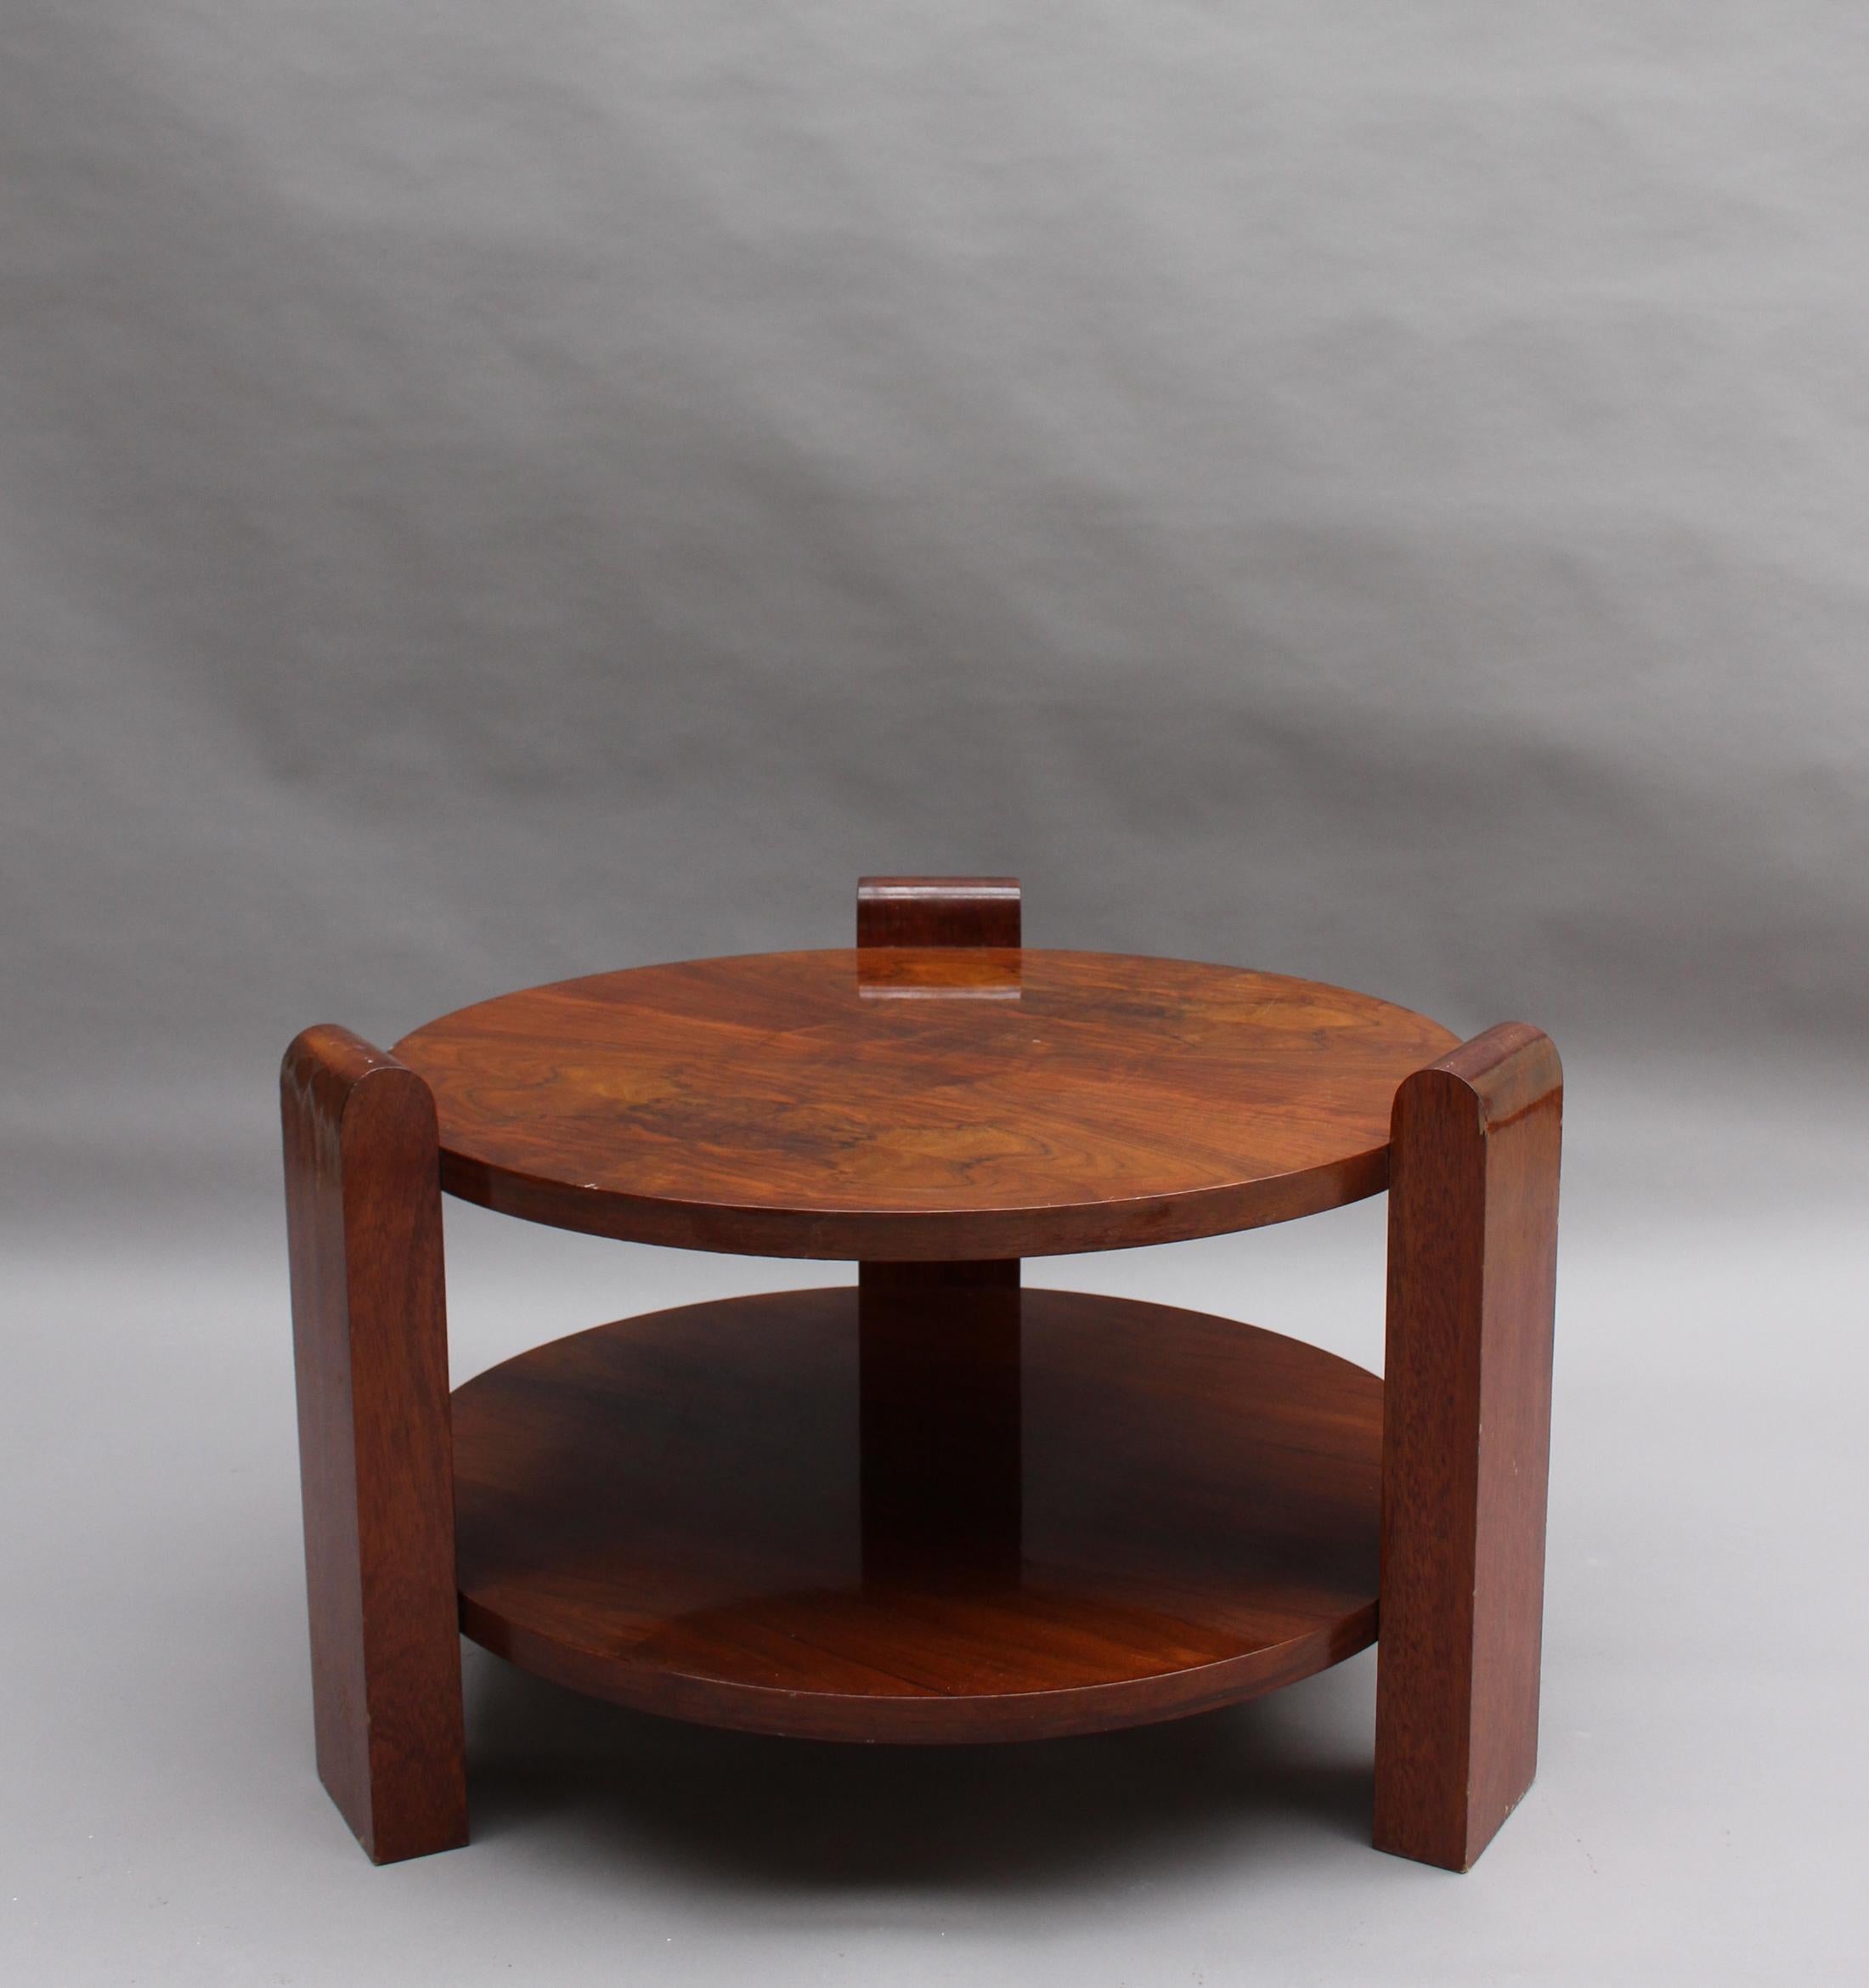 A large French Art Deco two-tier walnut gueridon.
Overall dimensions are W 34 in. H 21.5 in.